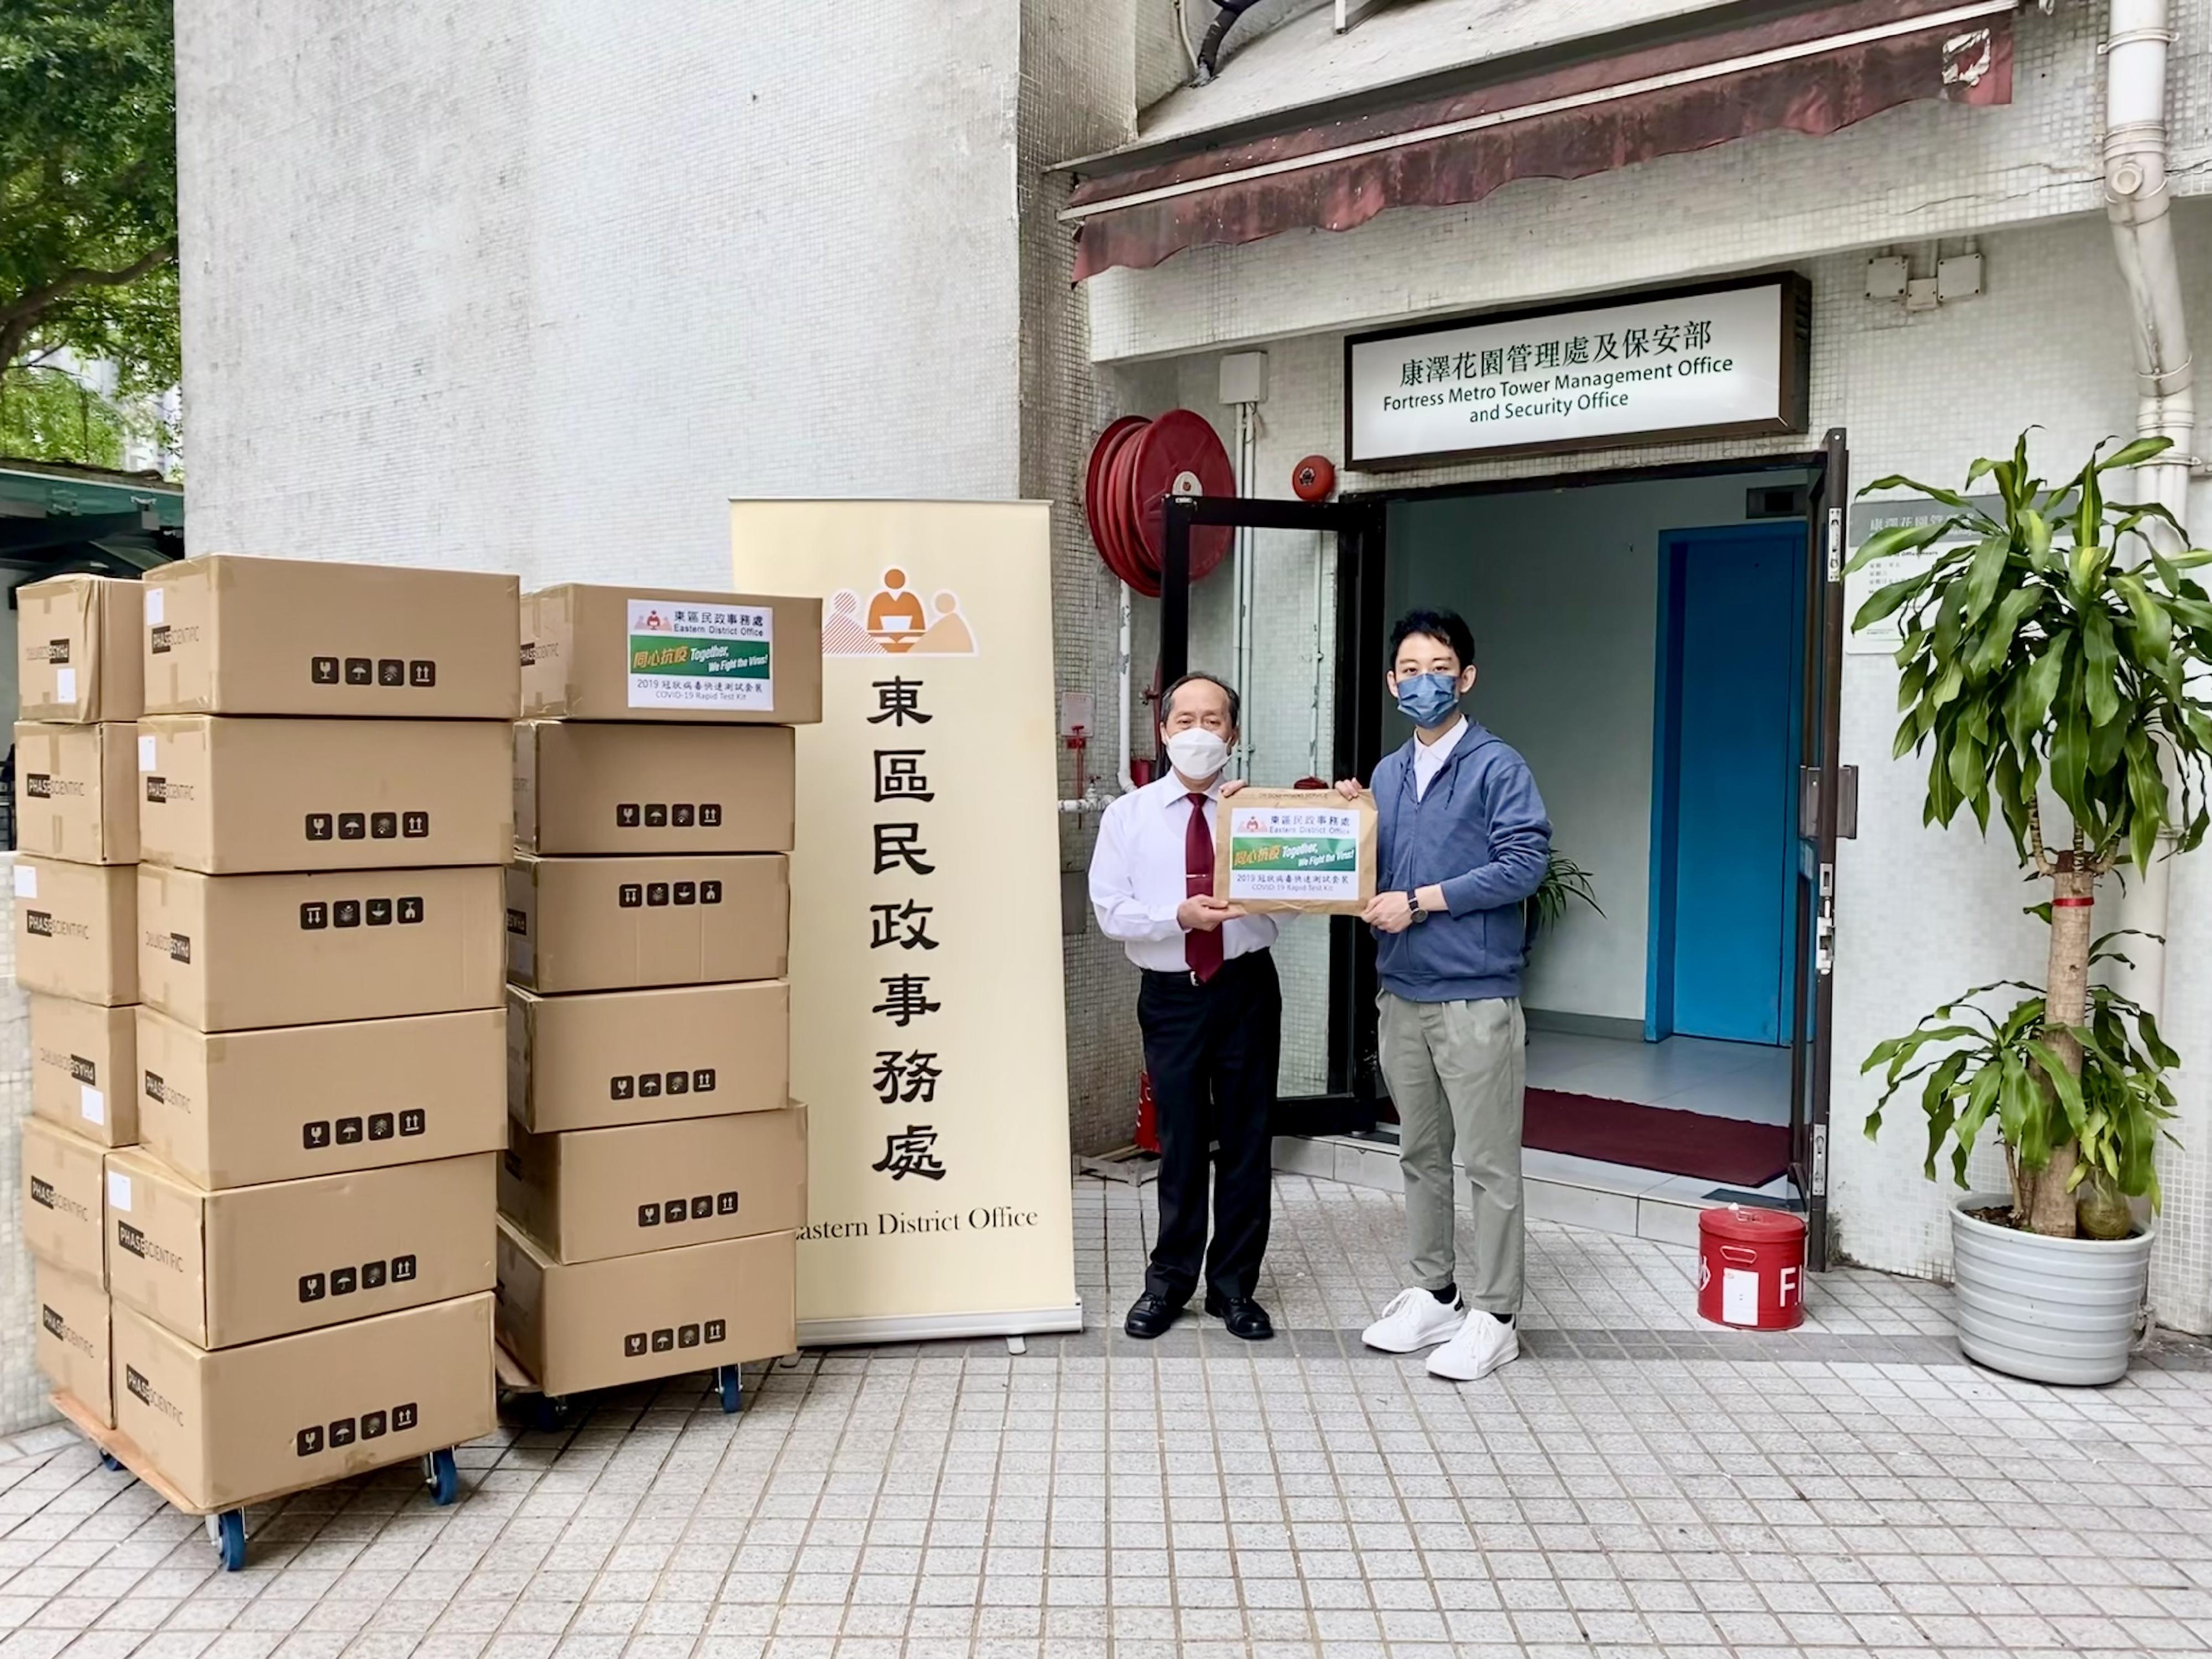 The Eastern District Office today (April 22) distributed COVID-19 rapid test kits to households, cleansing workers and property management staff living and working in Fortress Metro Tower for voluntary testing through the property management company.